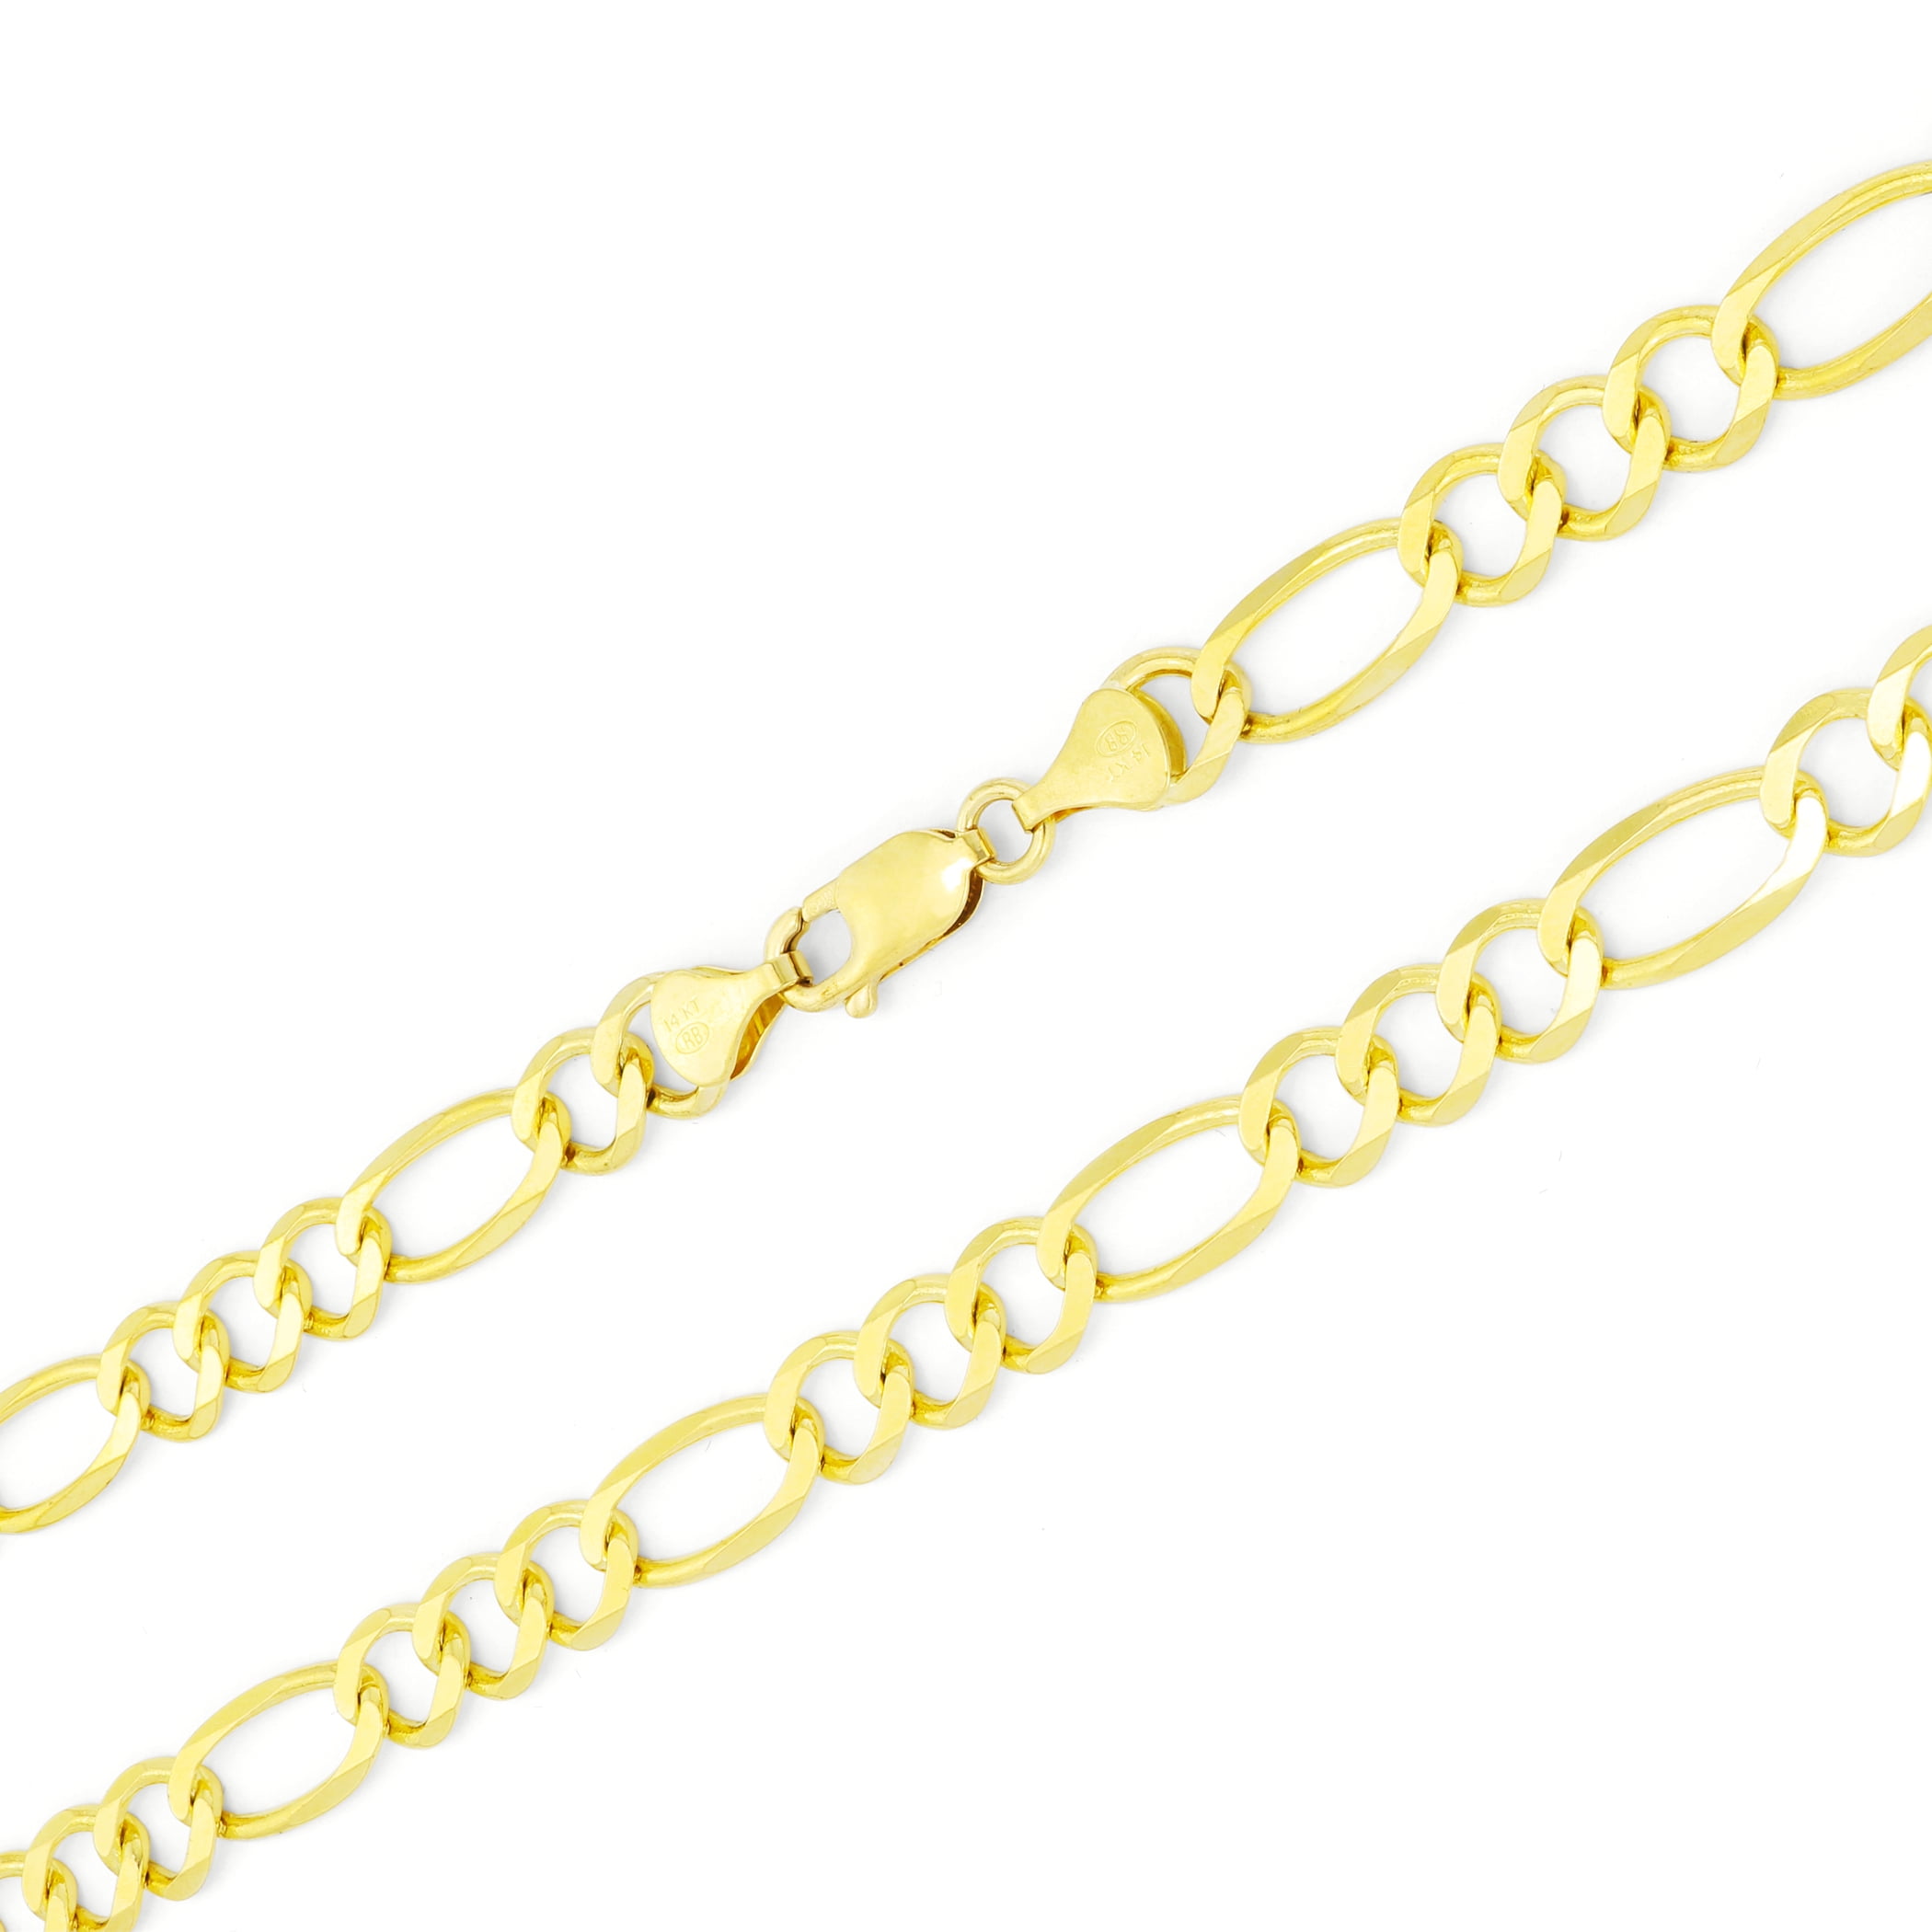 Mia Diamonds 14k Solid Yellow Gold 1.1mm Box Necklace Chain 7in x 1.1mm